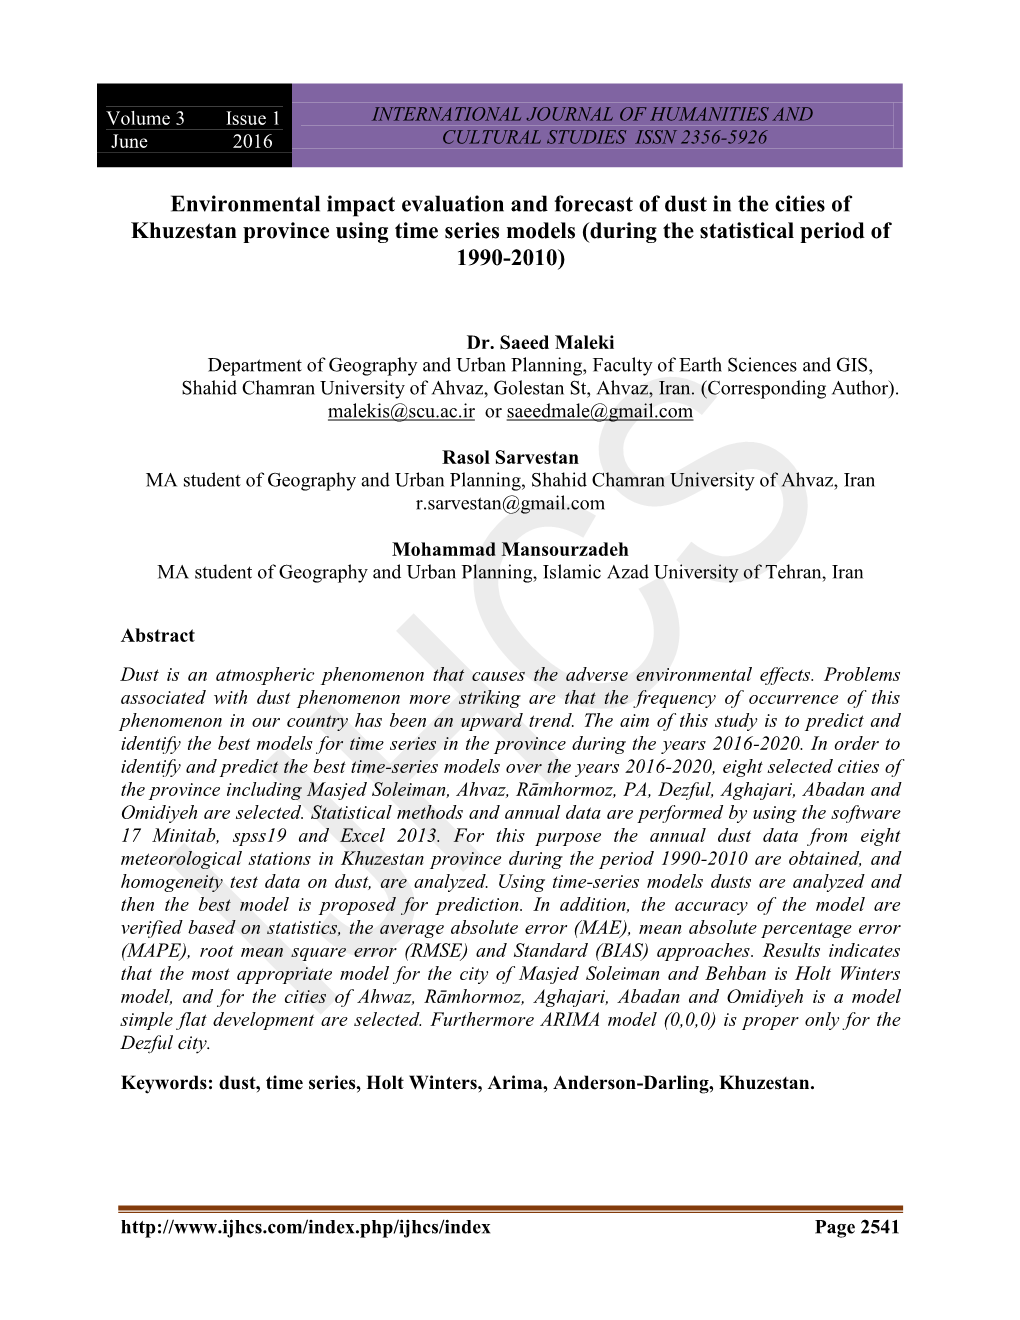 Environmental Impact Evaluation and Forecast of Dust in the Cities of Khuzestan Province Using Time Series Models (During the Statistical Period of 1990-2010)